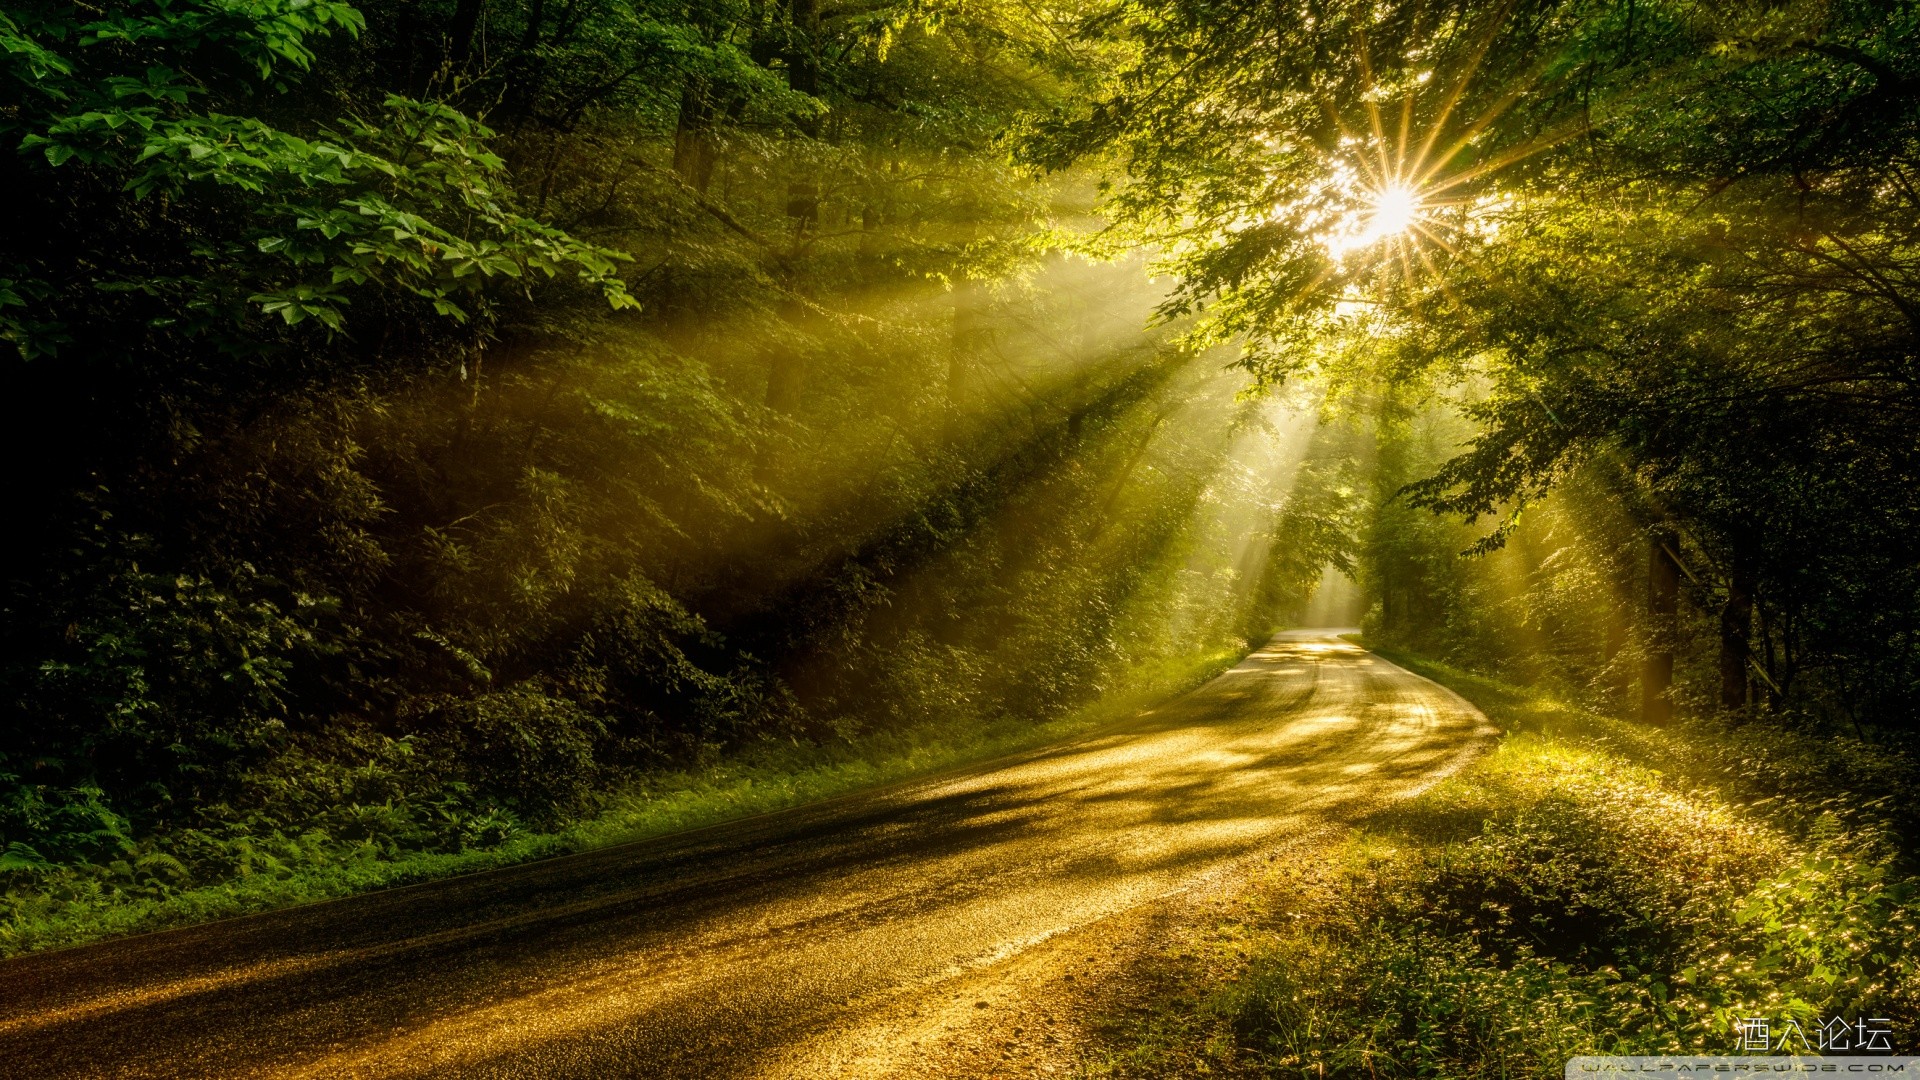 sun_rays_through_the_forest_trees_road-wallpaper-1920x1080.jpg